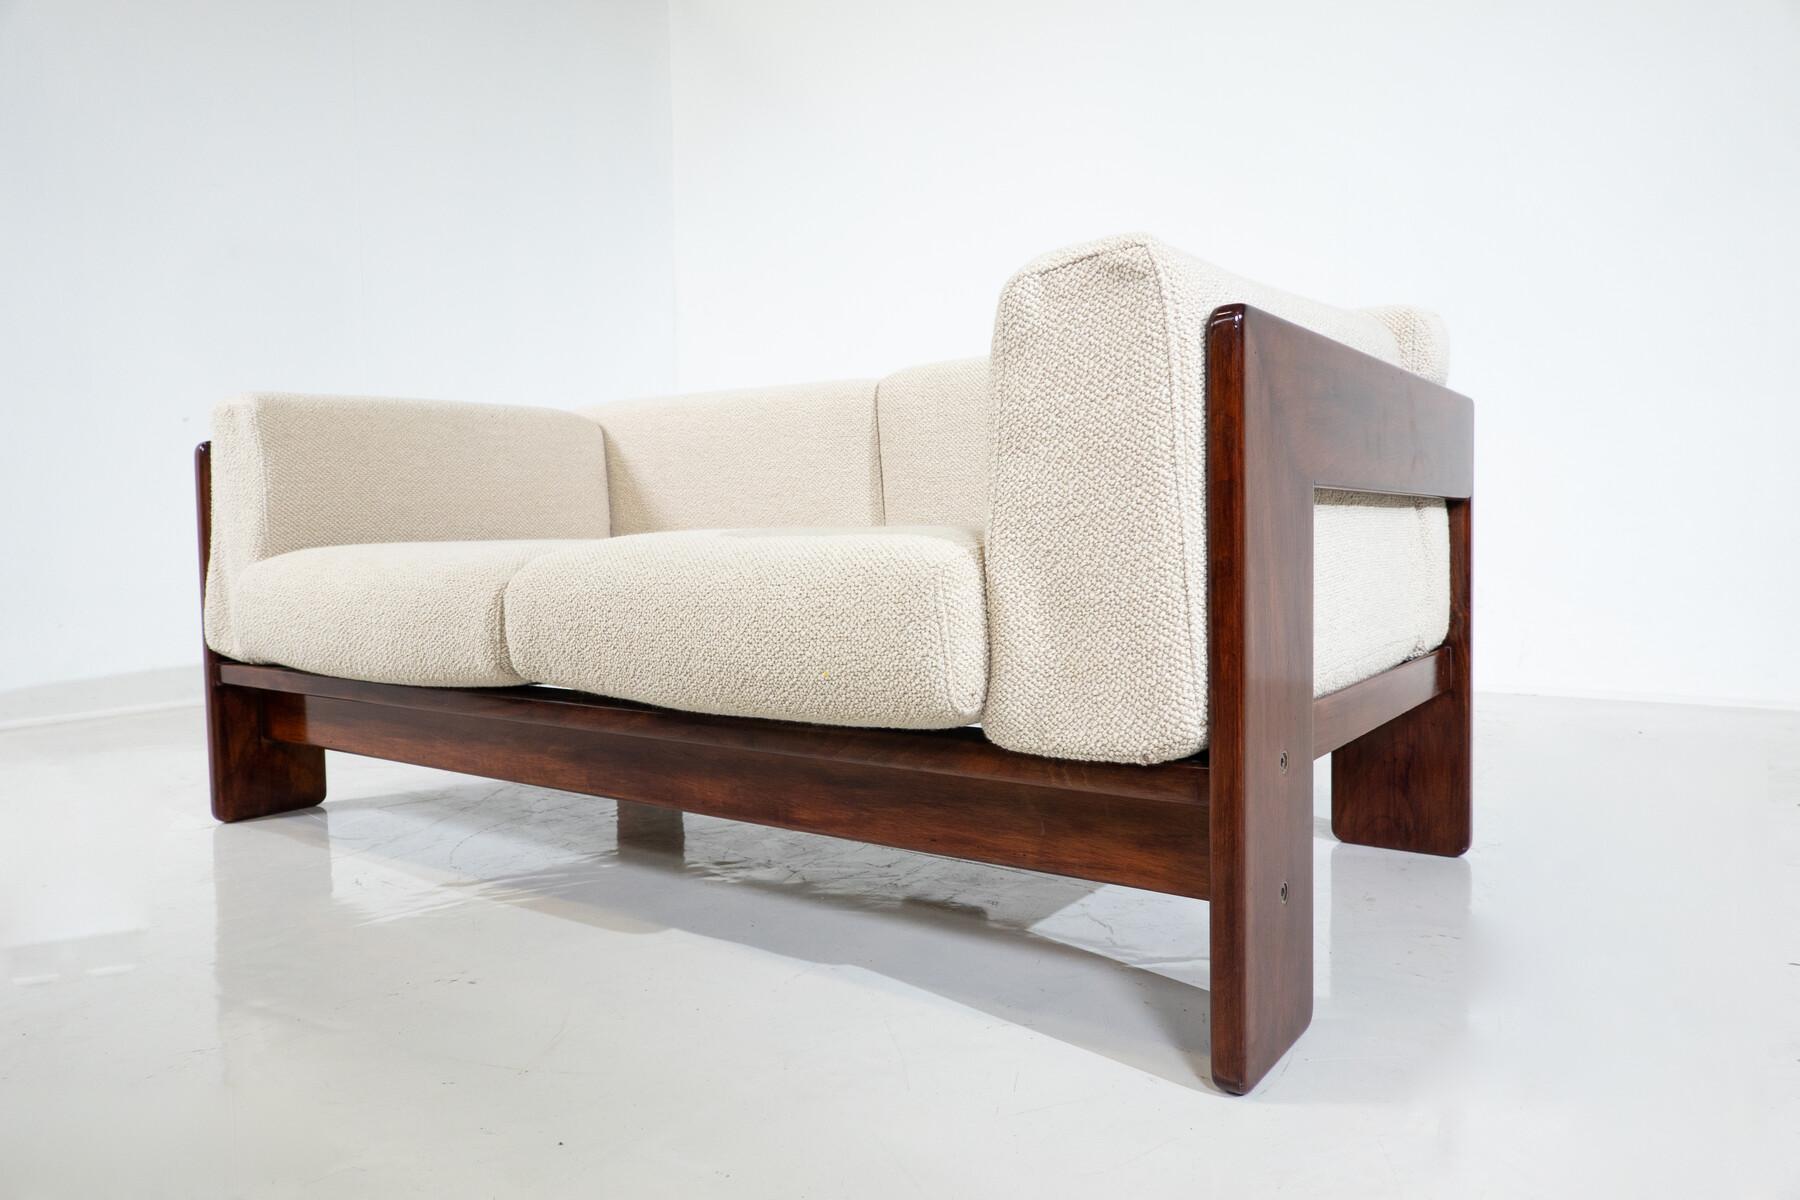 Mid-Century Modern Bastiano Two-Seater Sofa by Tobia Scarpa for Gavina, 1960s - New Upholstery